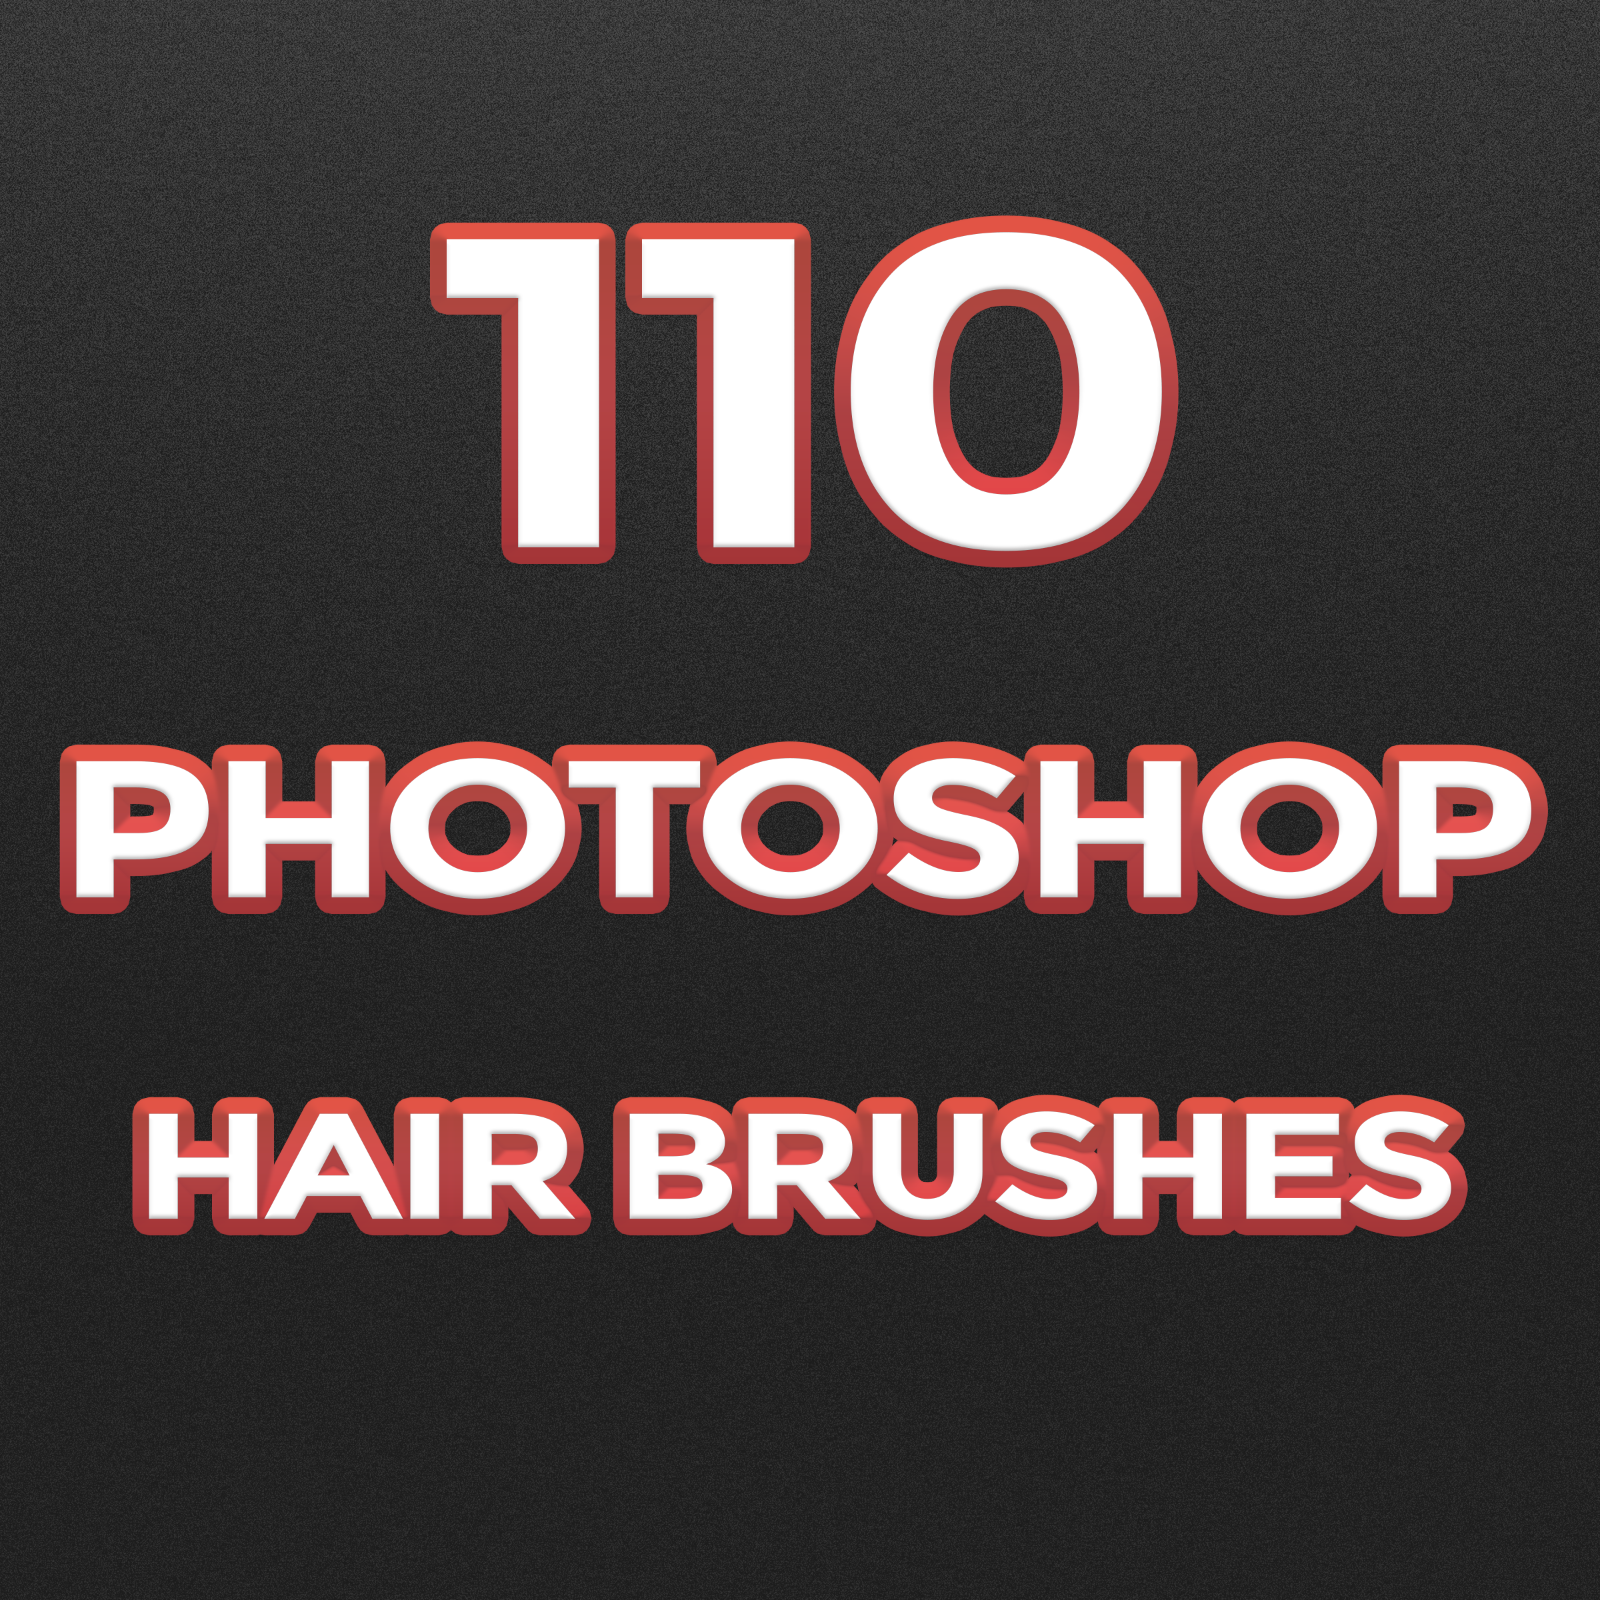 100+ Hair Brushes Collection For Photoshop | eBay